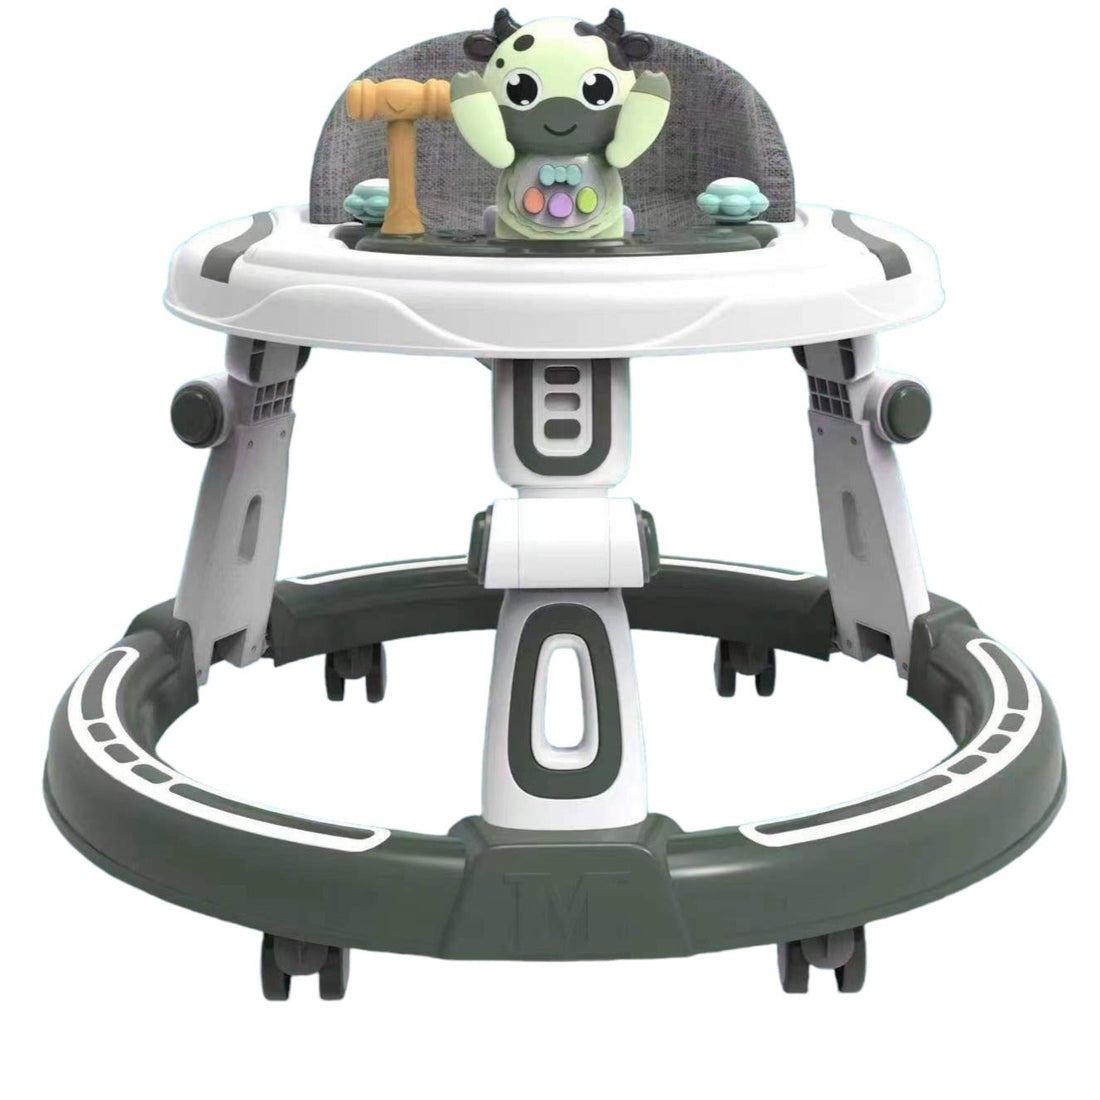 Little Explorer Space-Themed Baby Walker with Activity Center